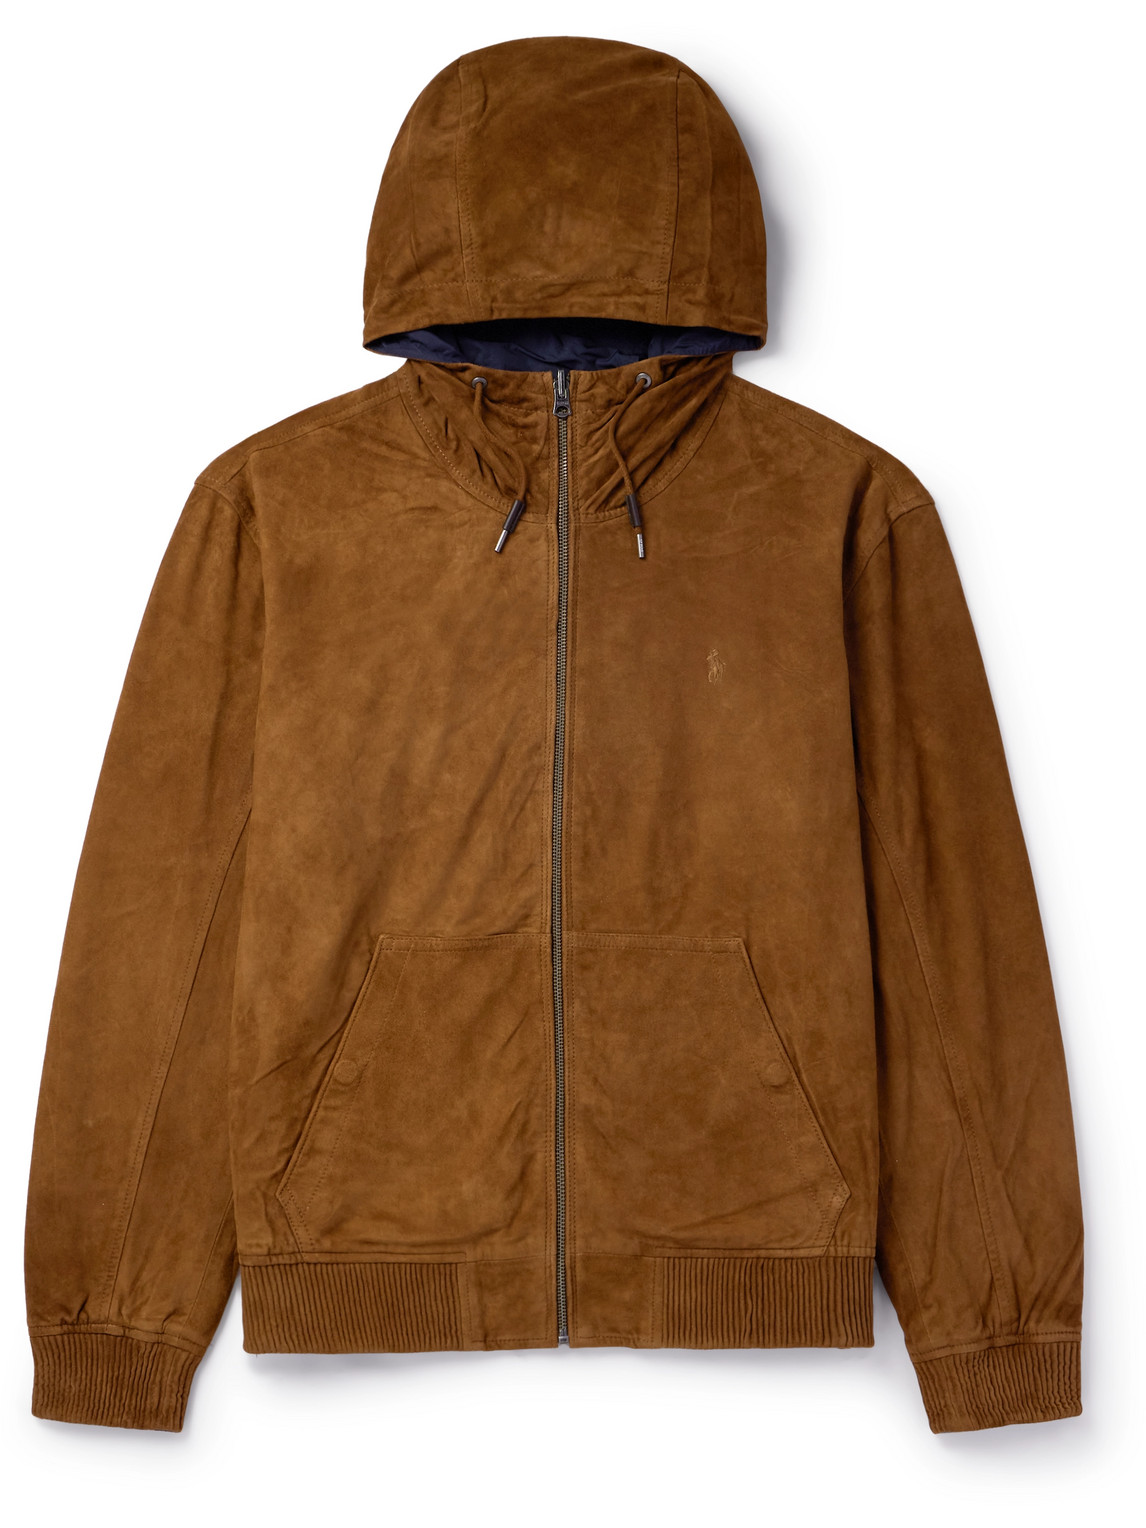 POLO RALPH LAUREN REVERSIBLE SUEDE AND TAFFETA HOODED JACKET